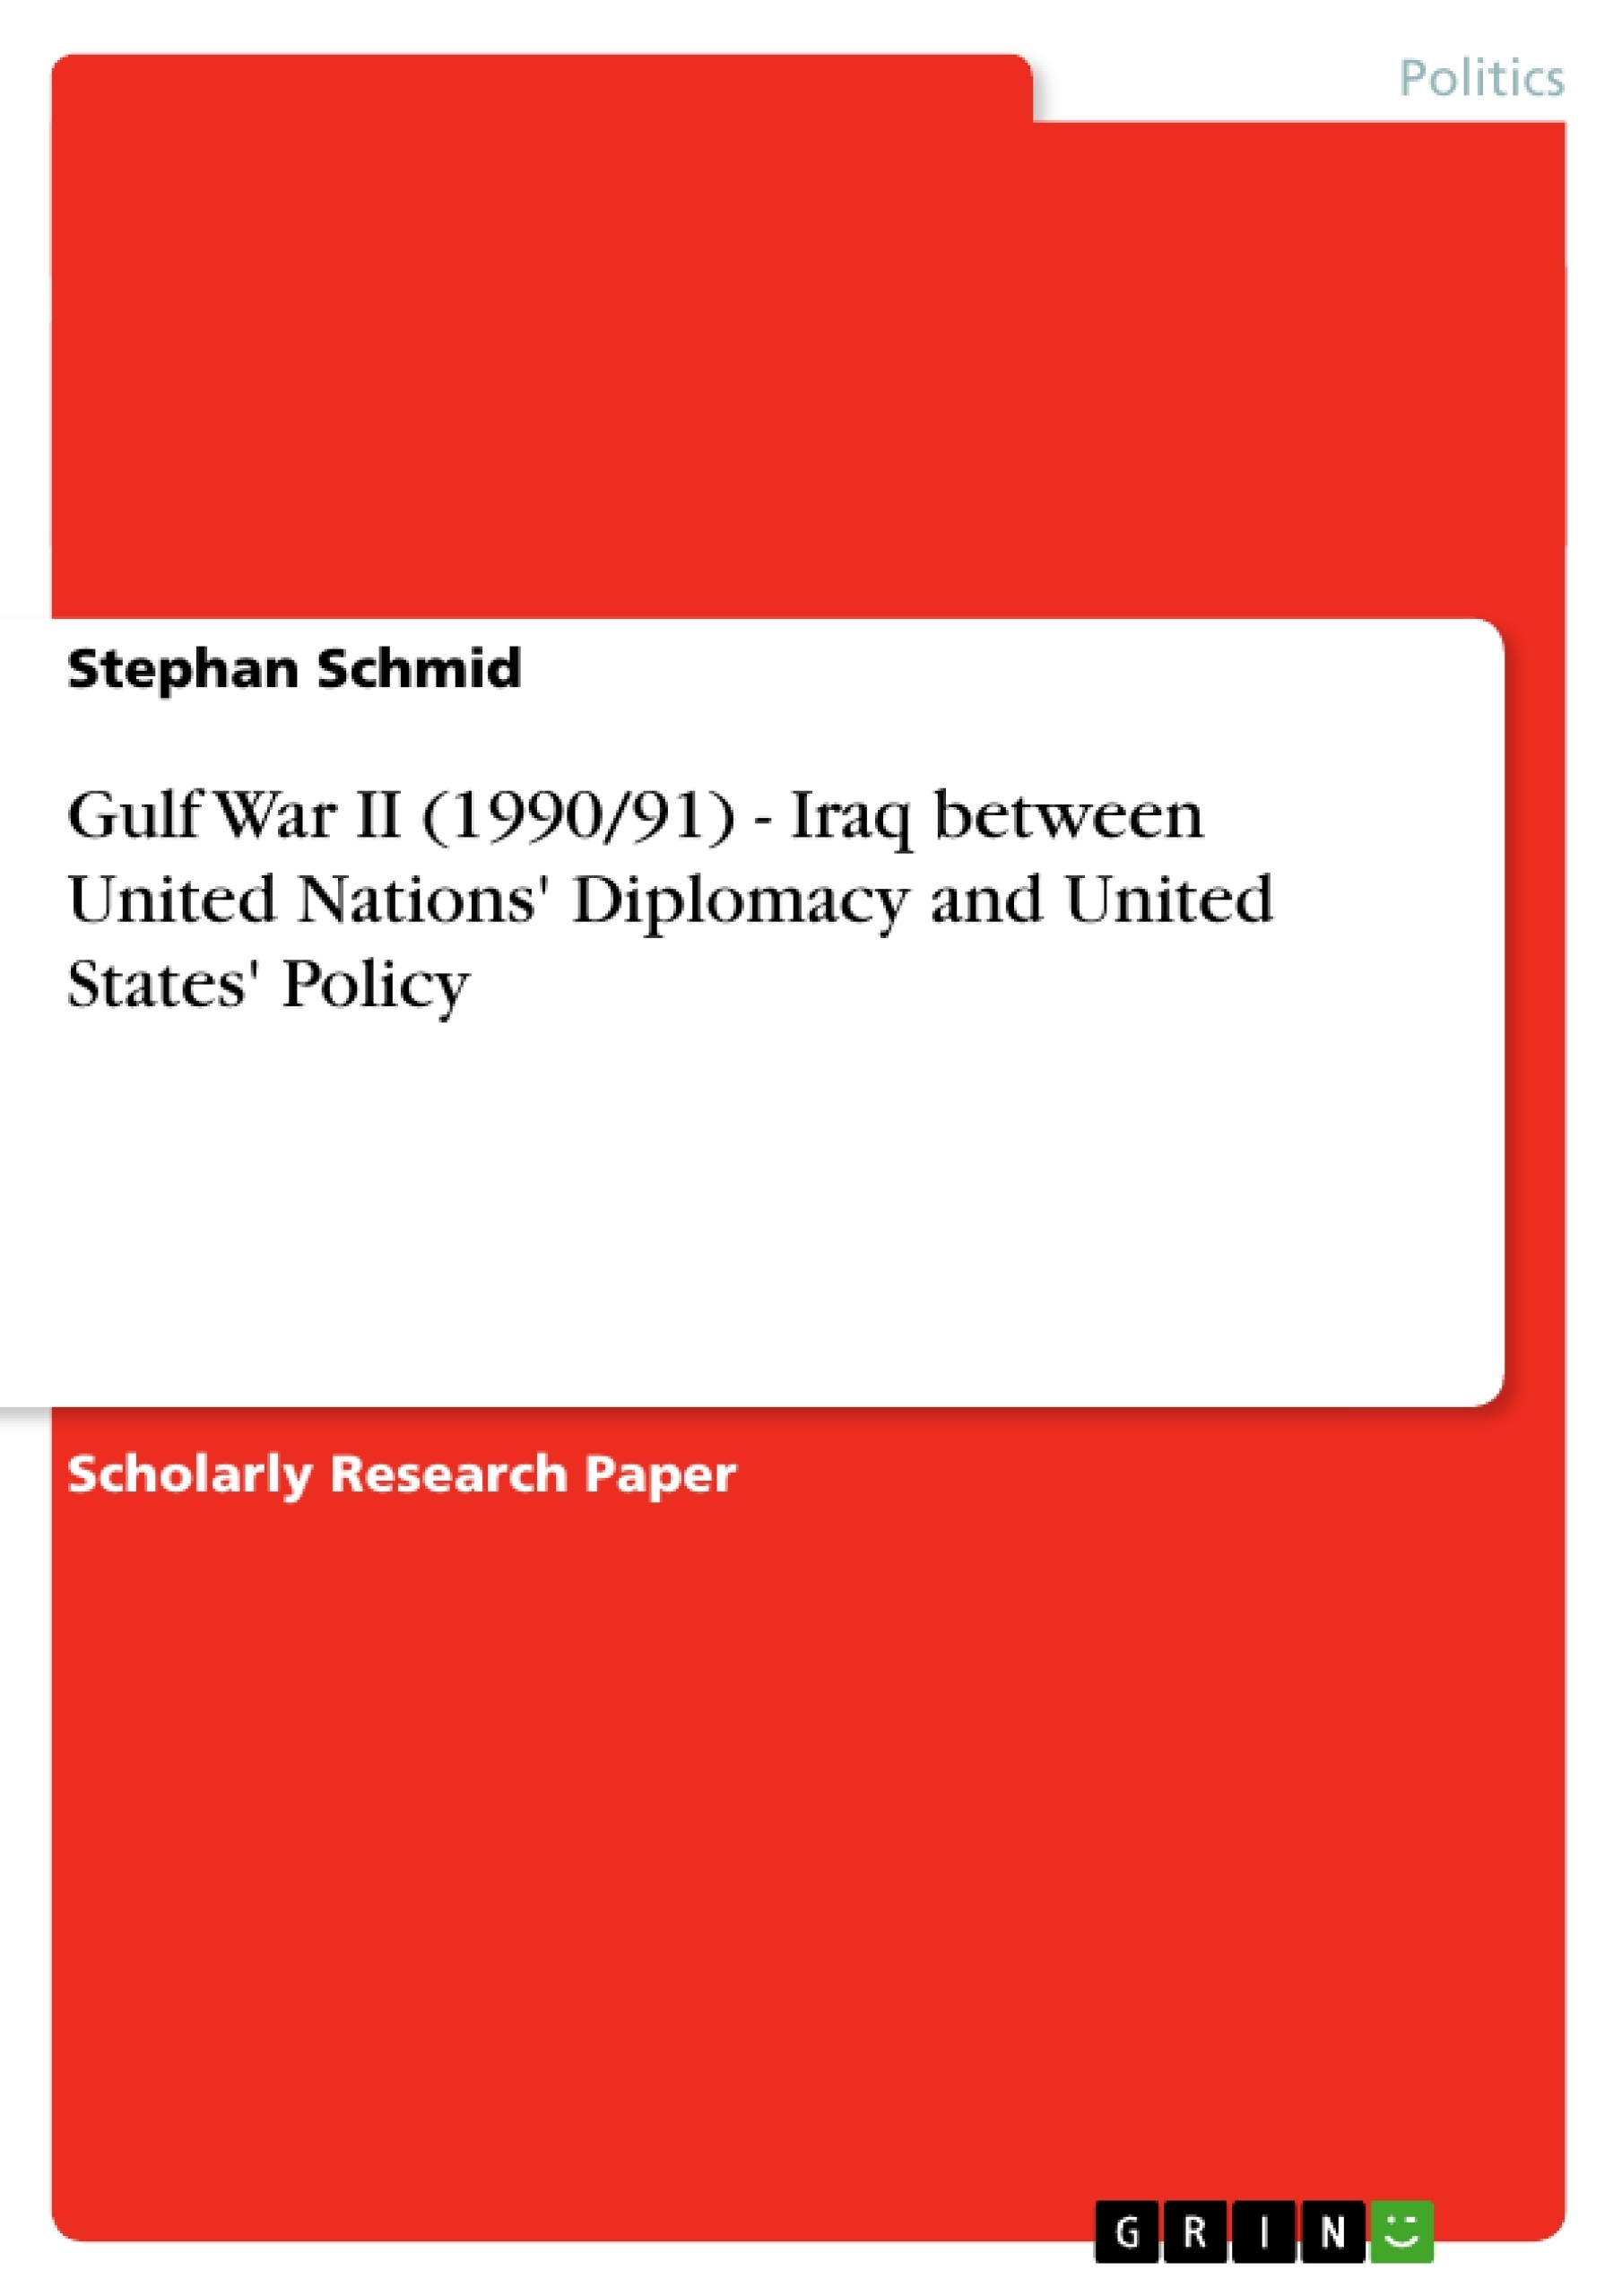 Título: Gulf War II (1990/91)  -  Iraq between United Nations' Diplomacy and United States' Policy